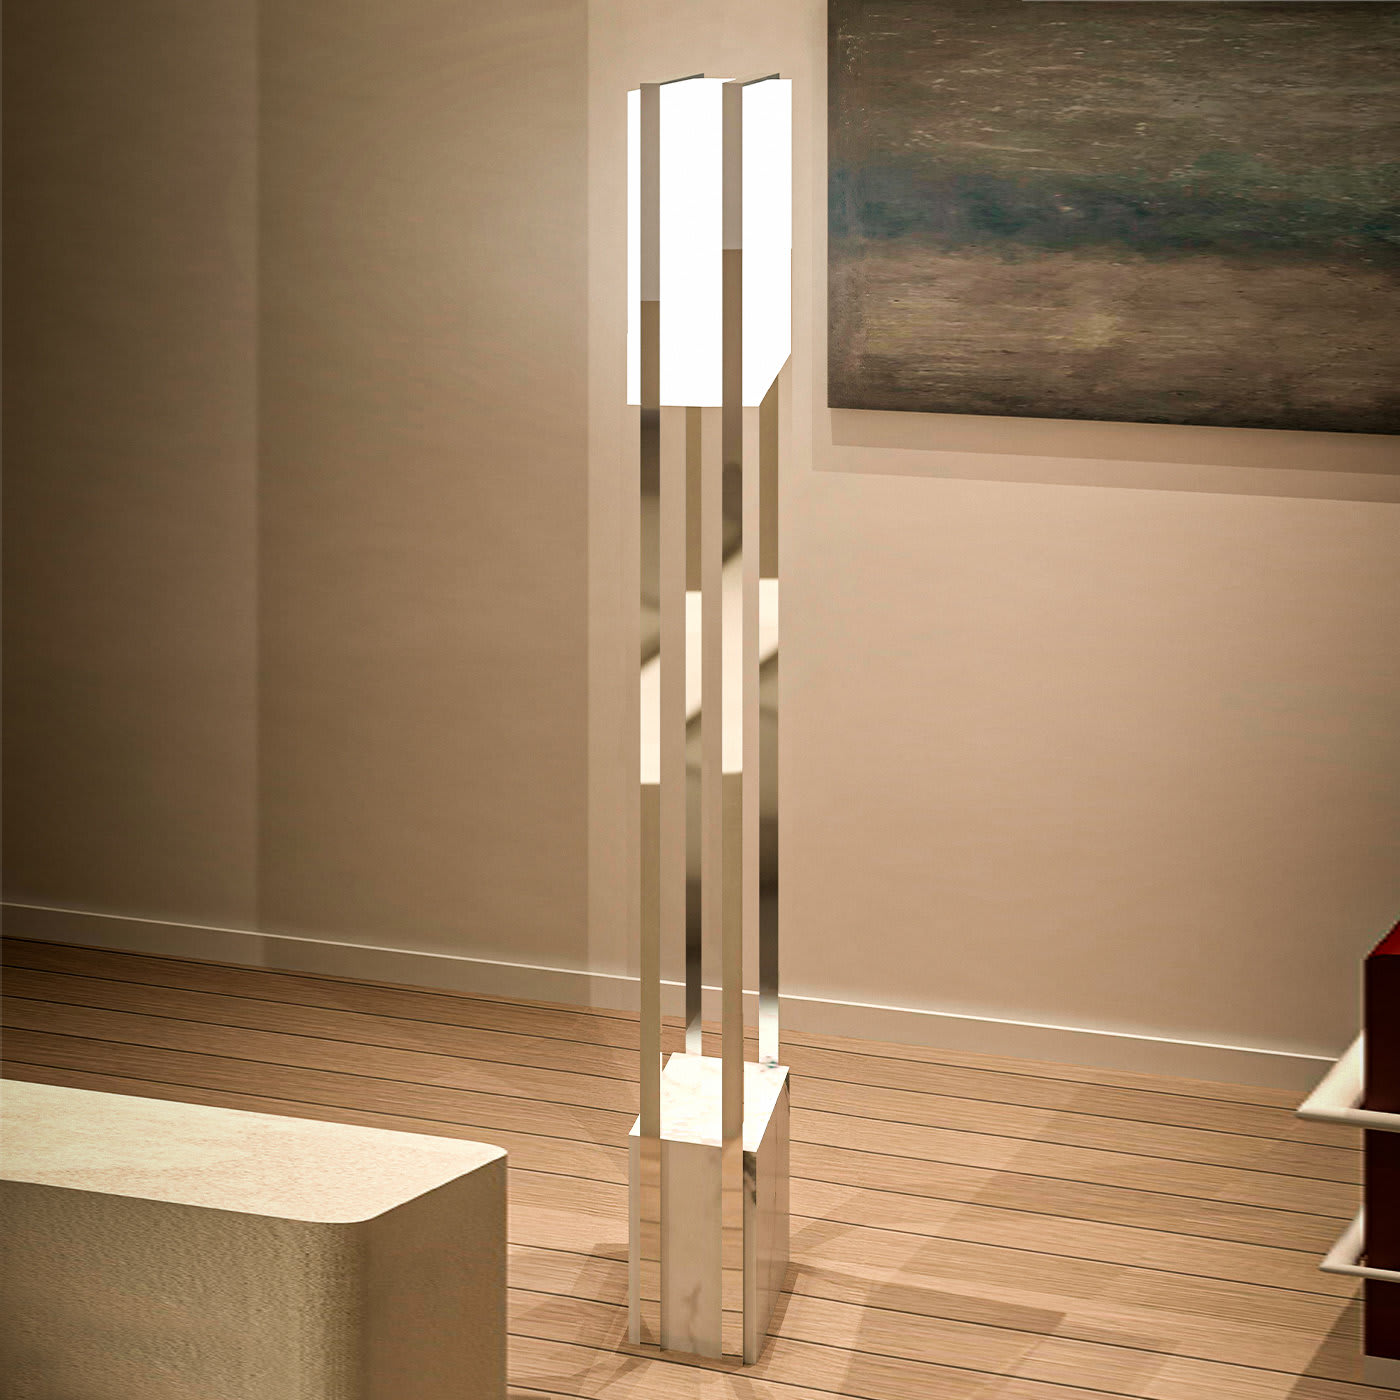 Totem Suitcase Floor Lamp with White Carrara Marble Base by Vincenzo Bafunno - Ledevò